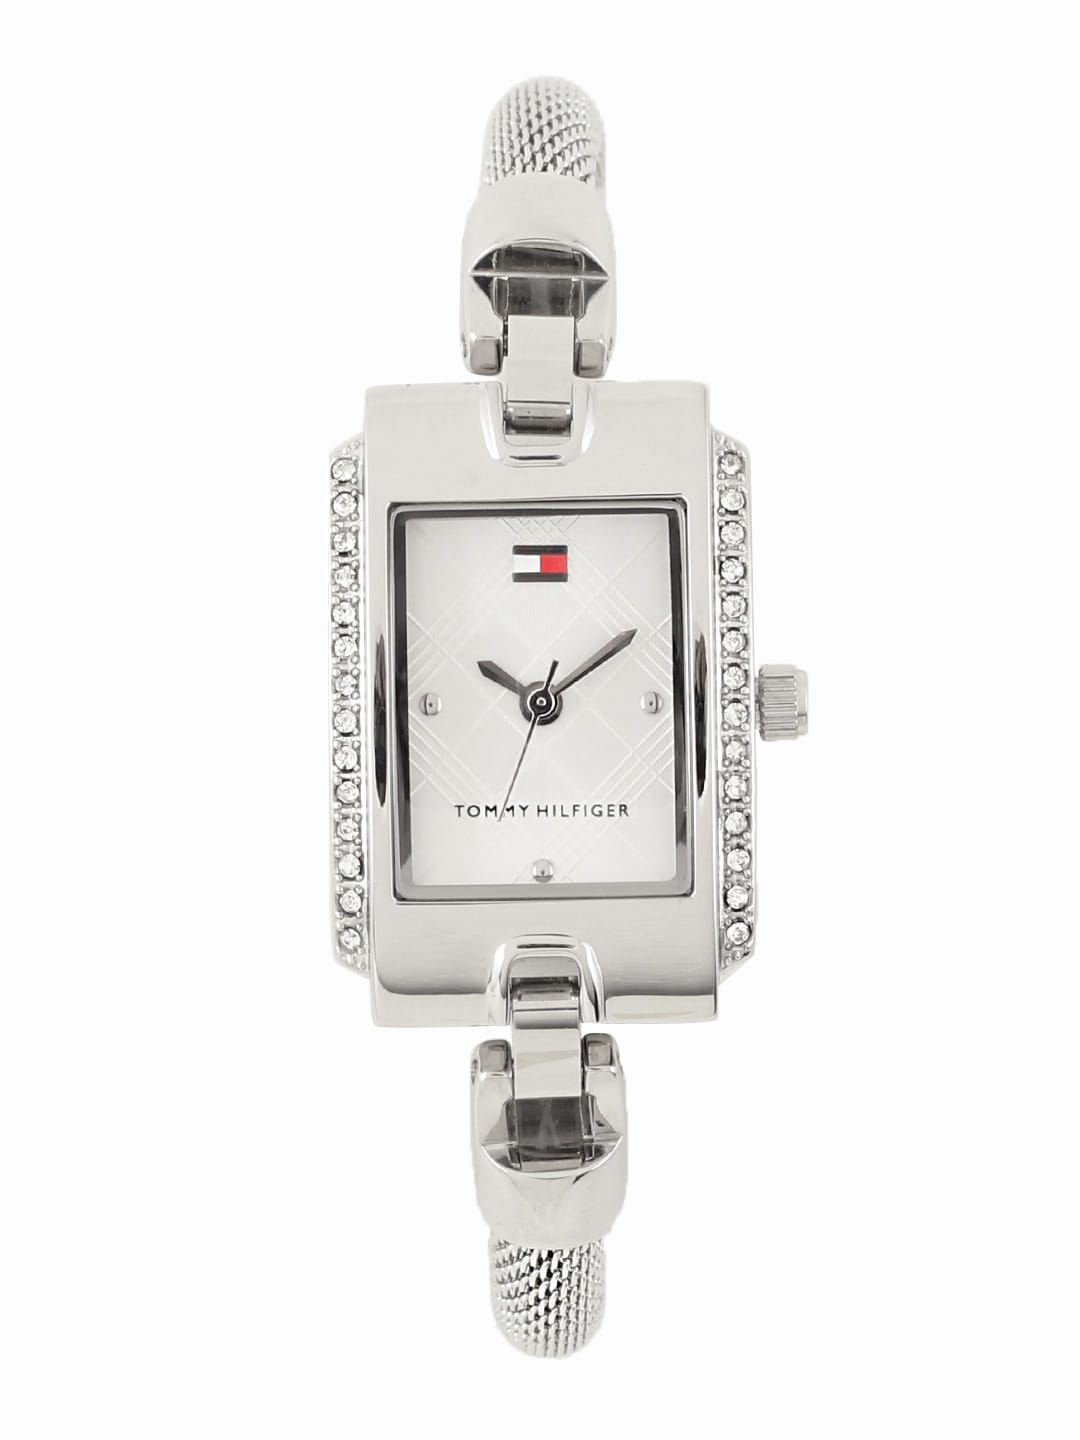 Tommy Hilfiger Women Silver-Toned Dial  Watch TH1780453-D